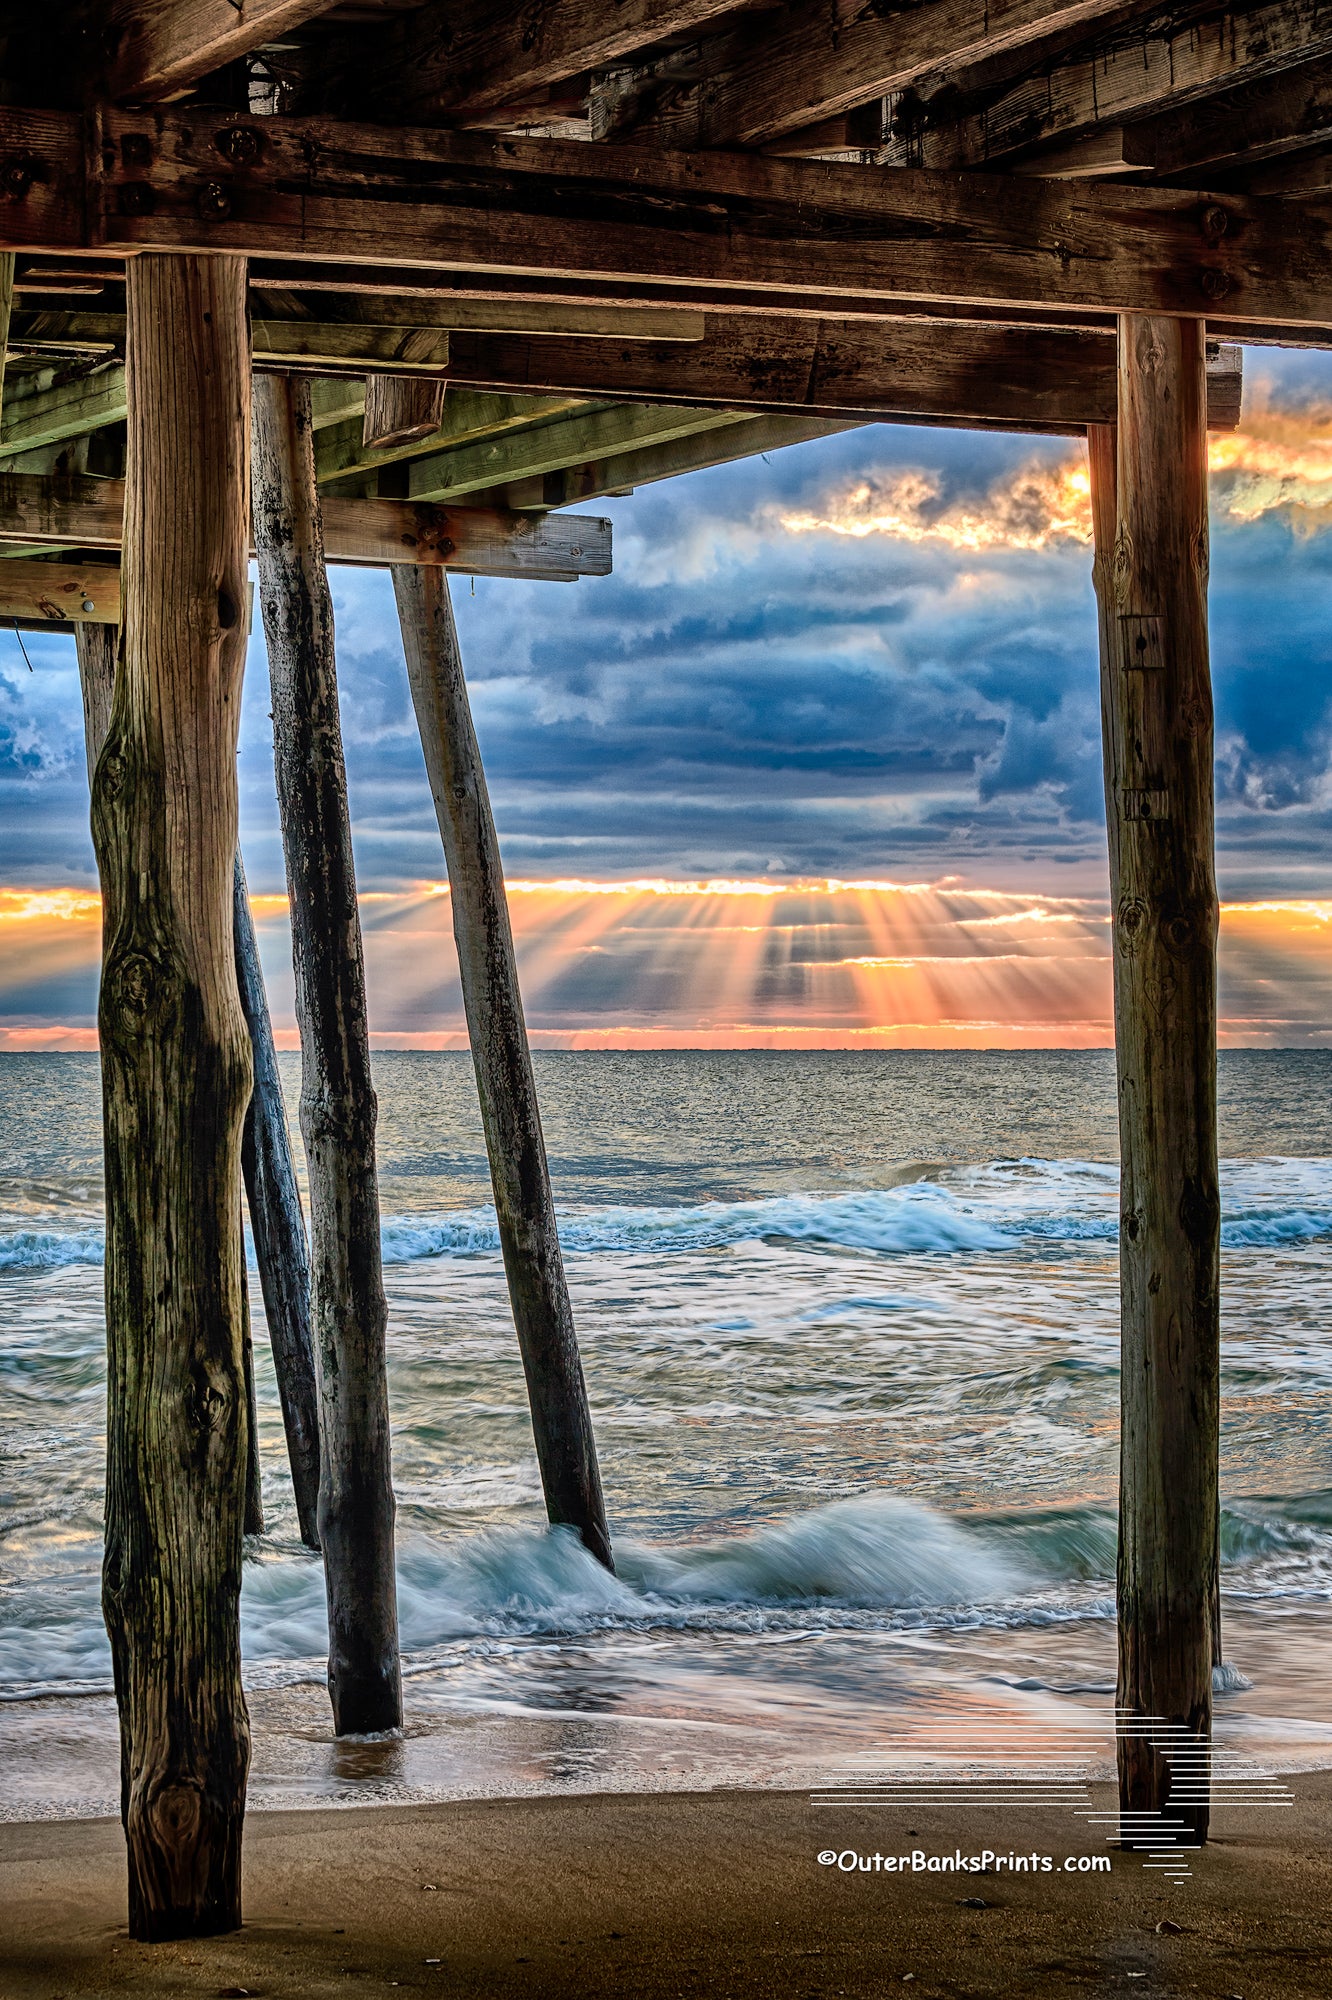 Rays of sun light streak through the clouds at Avalon Fishing Pier in Kill Devil Hills on the Outer Banks.